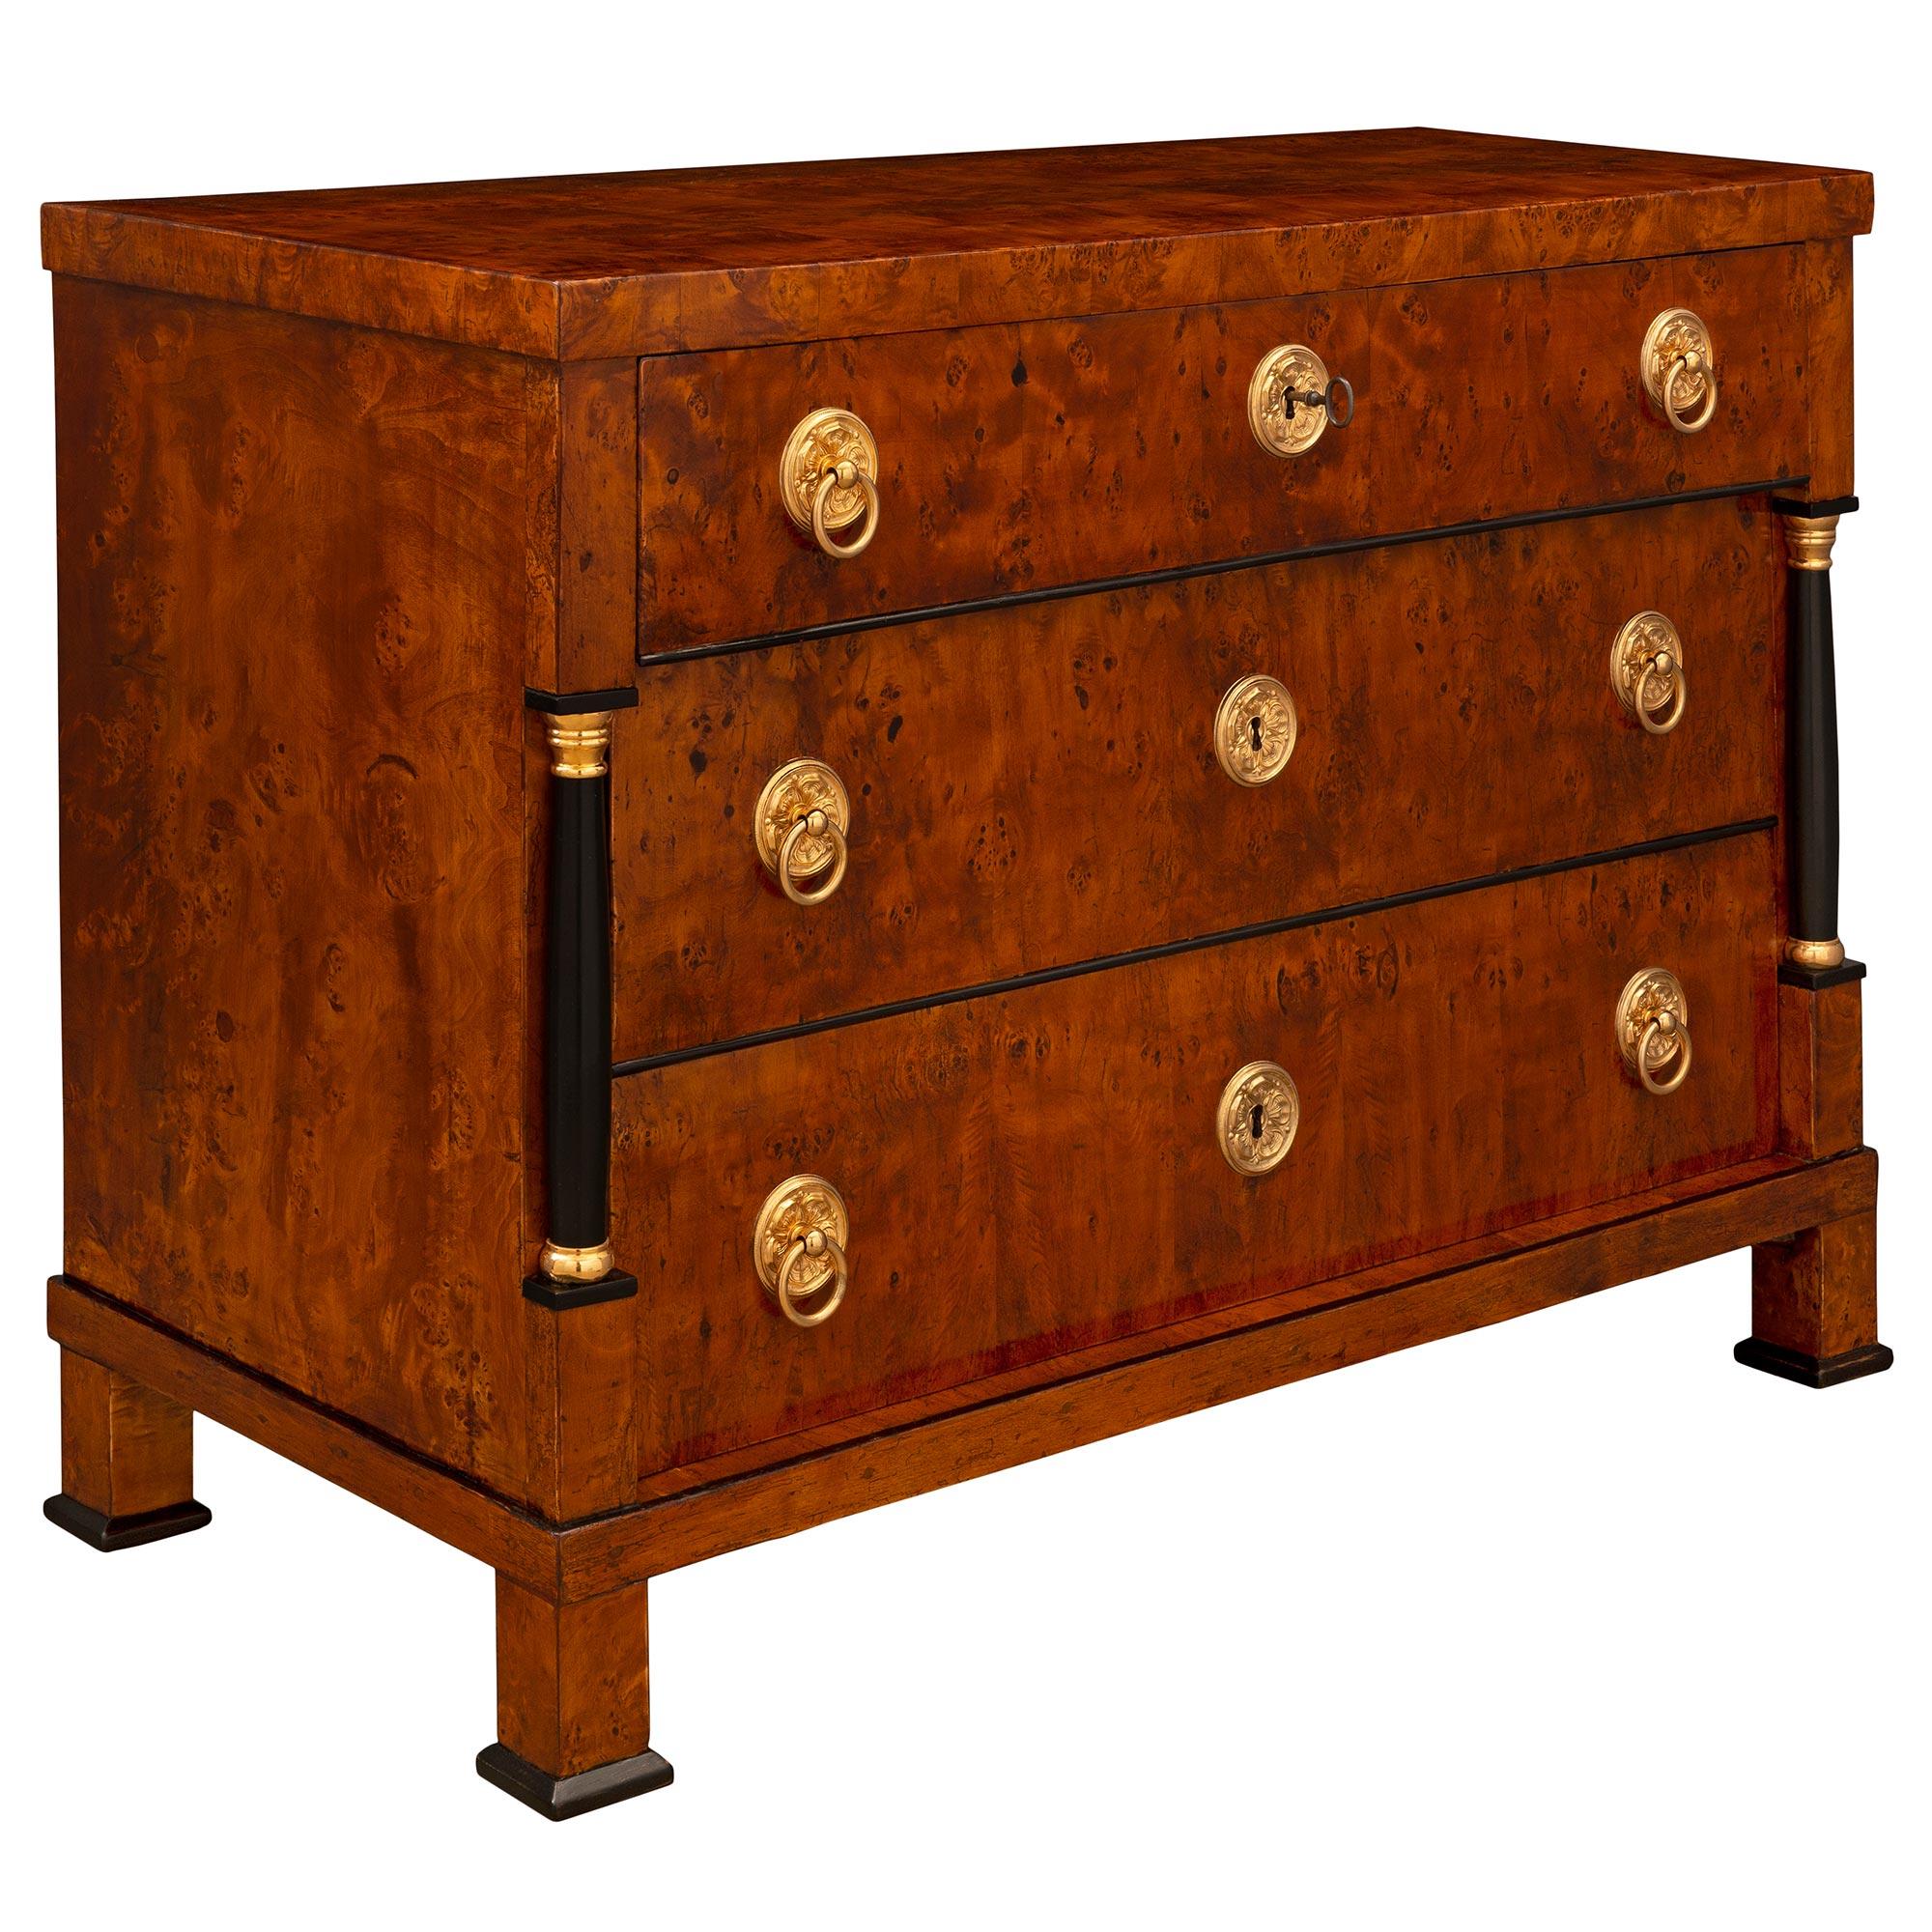 Unknown Continental 19th Century Burl Birchwood, Ebonized Fruitwood and Ormolu Commode For Sale